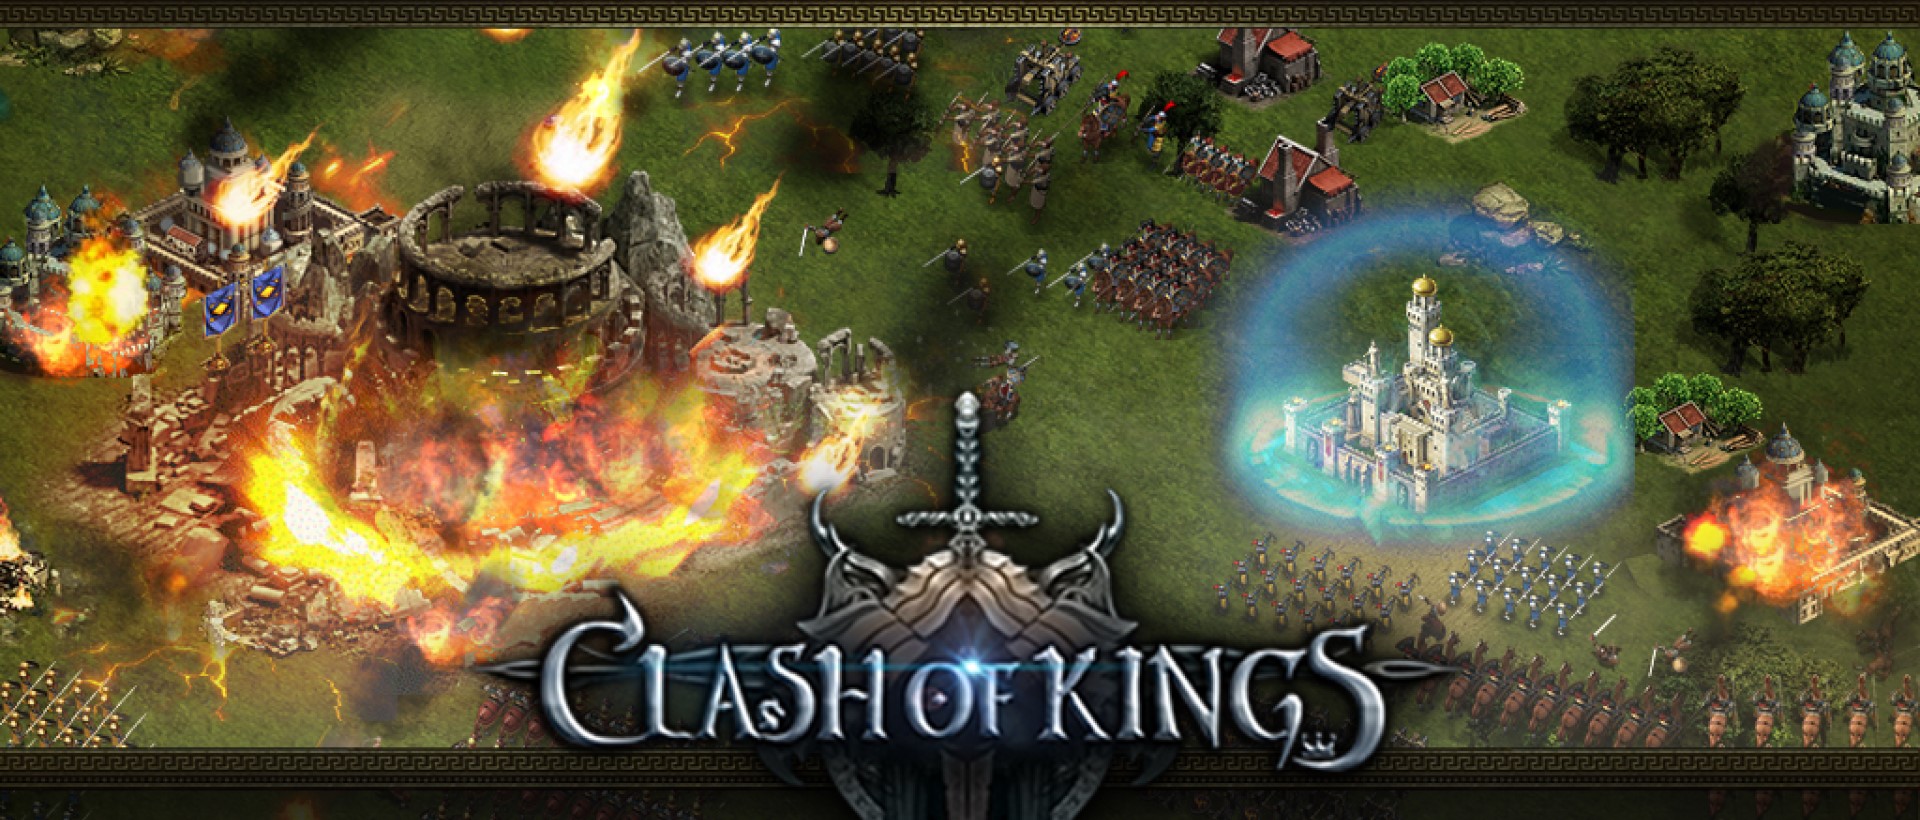 play clash of kings on pc